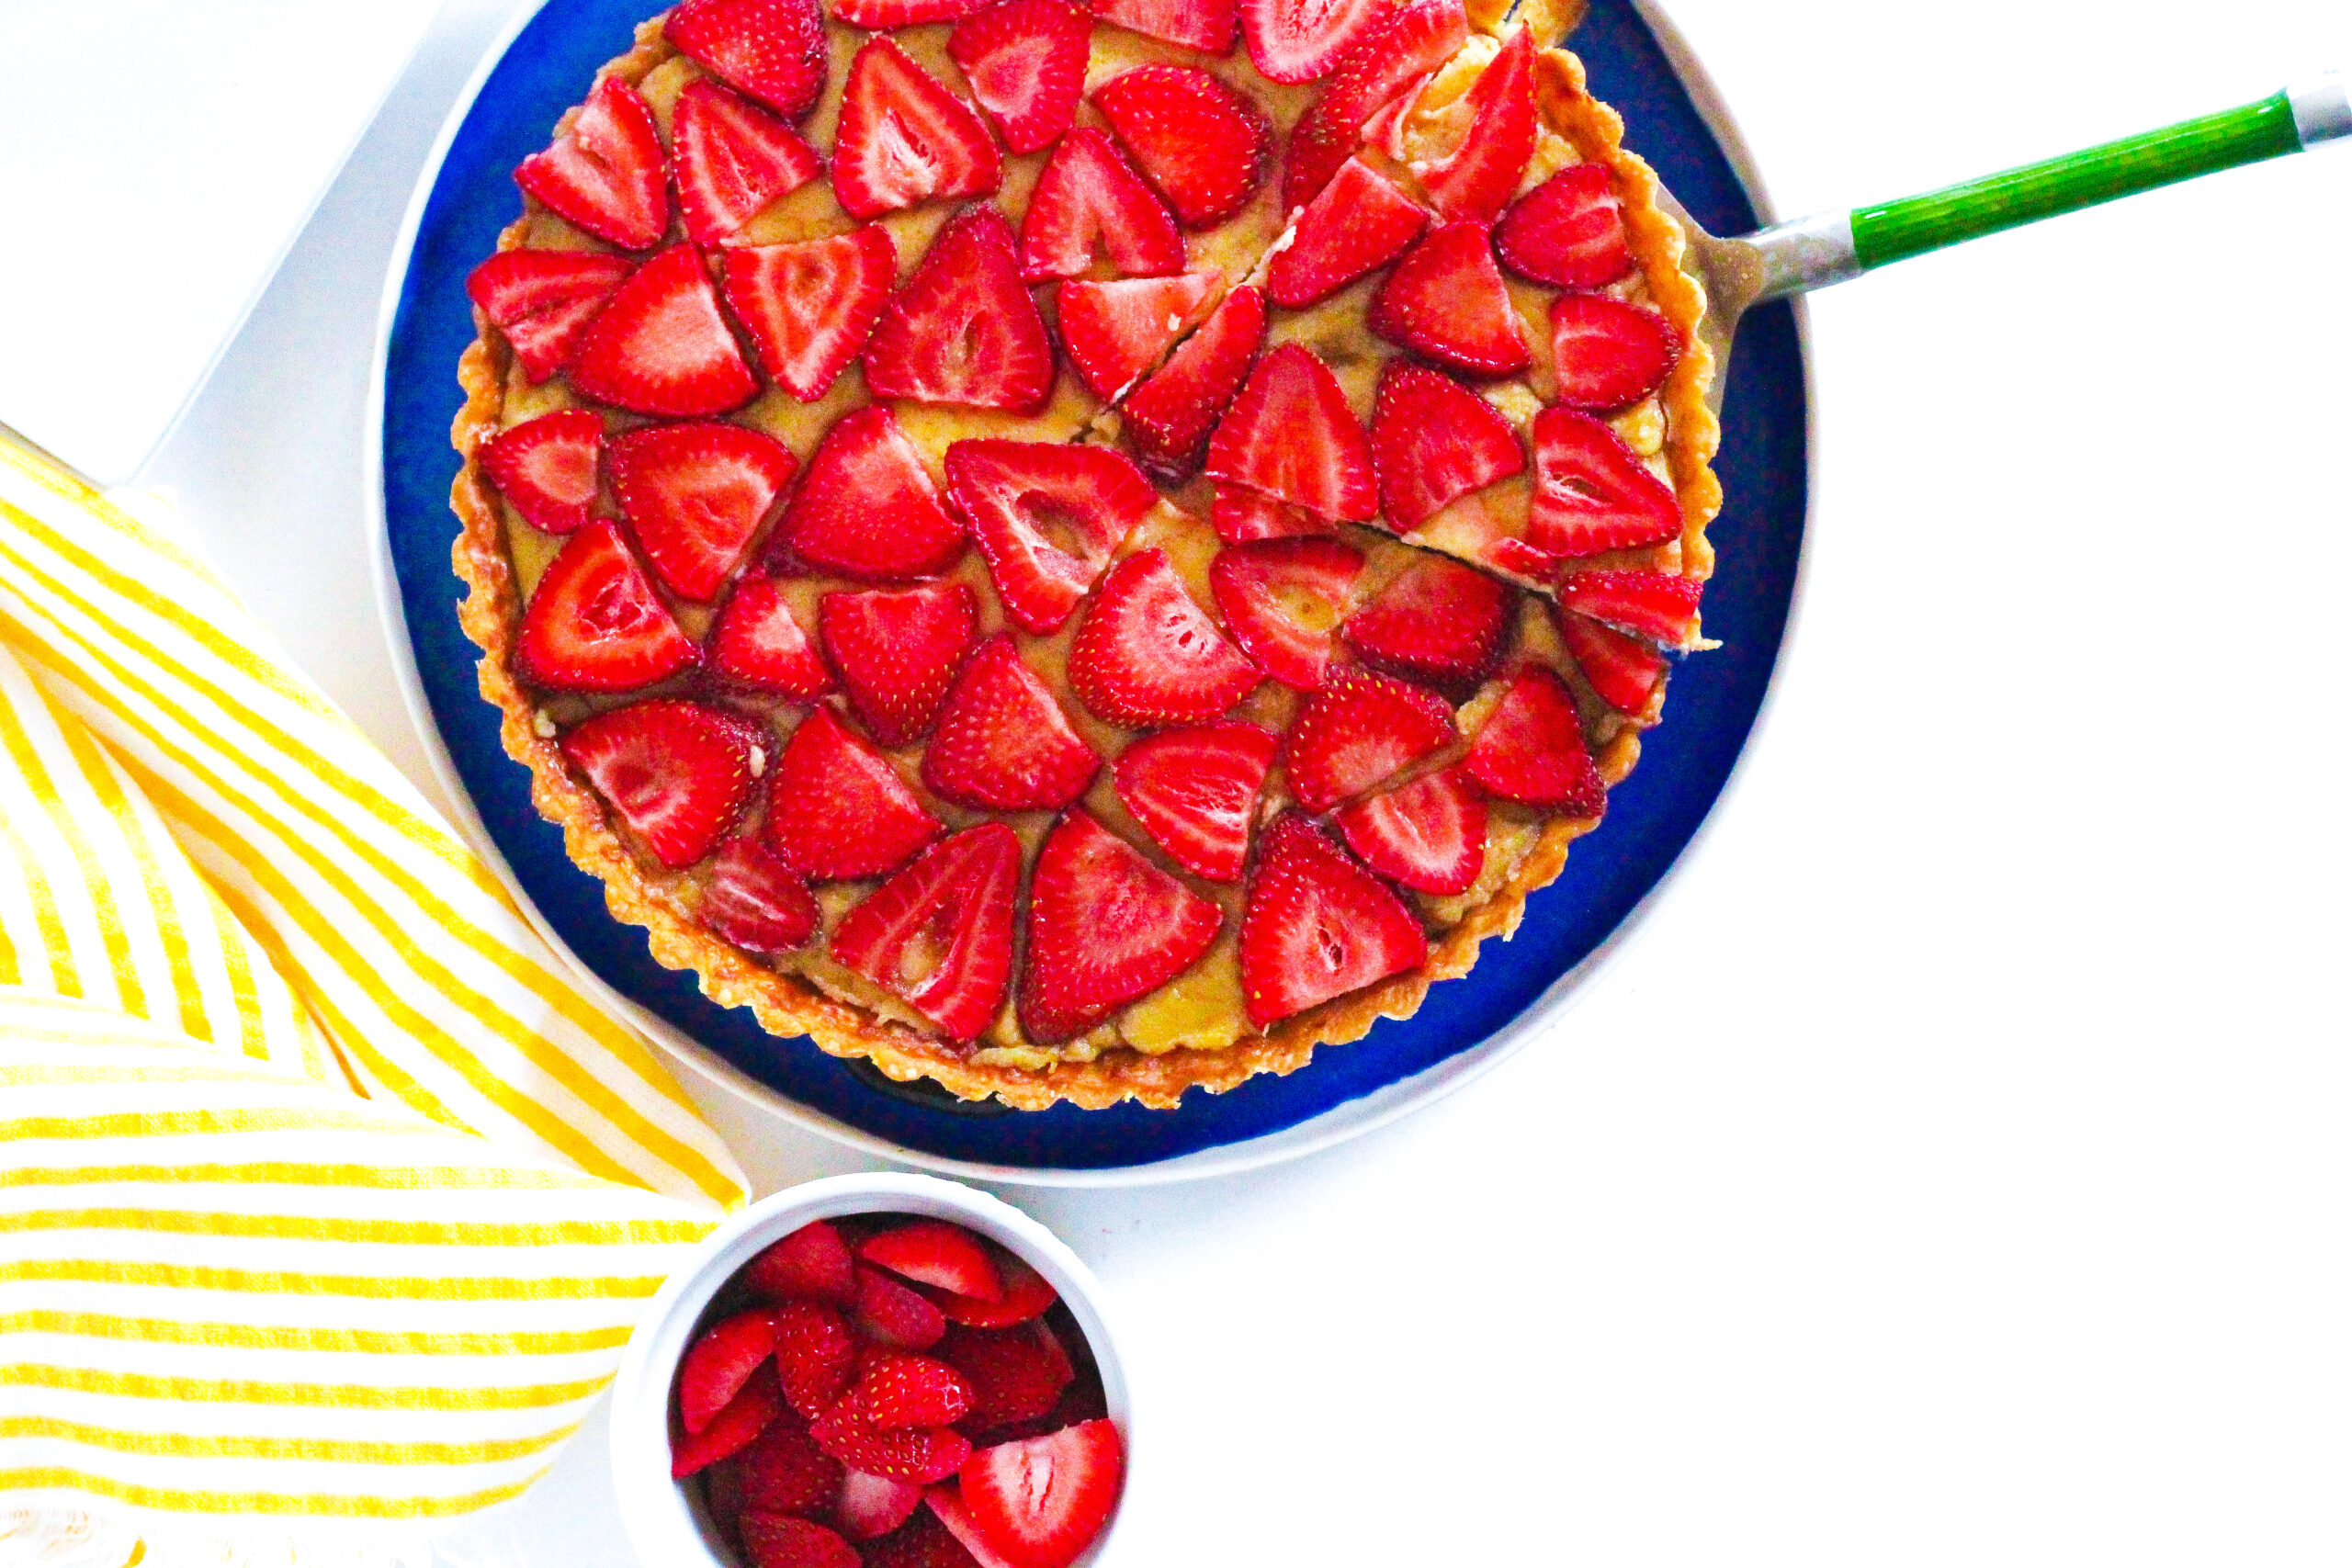 Top down view of a strawberry balsamic tart with the tart cut off of the top of the frame. A slice is cut out of the tart with a pie server under it, the green handle of the pie server sticking out to the right of the frame. below the tart is a small bowl of sliced strawberries, and to the left is a yellow striped towel. The tart is on a blue plate, and the scene is on a white surface.